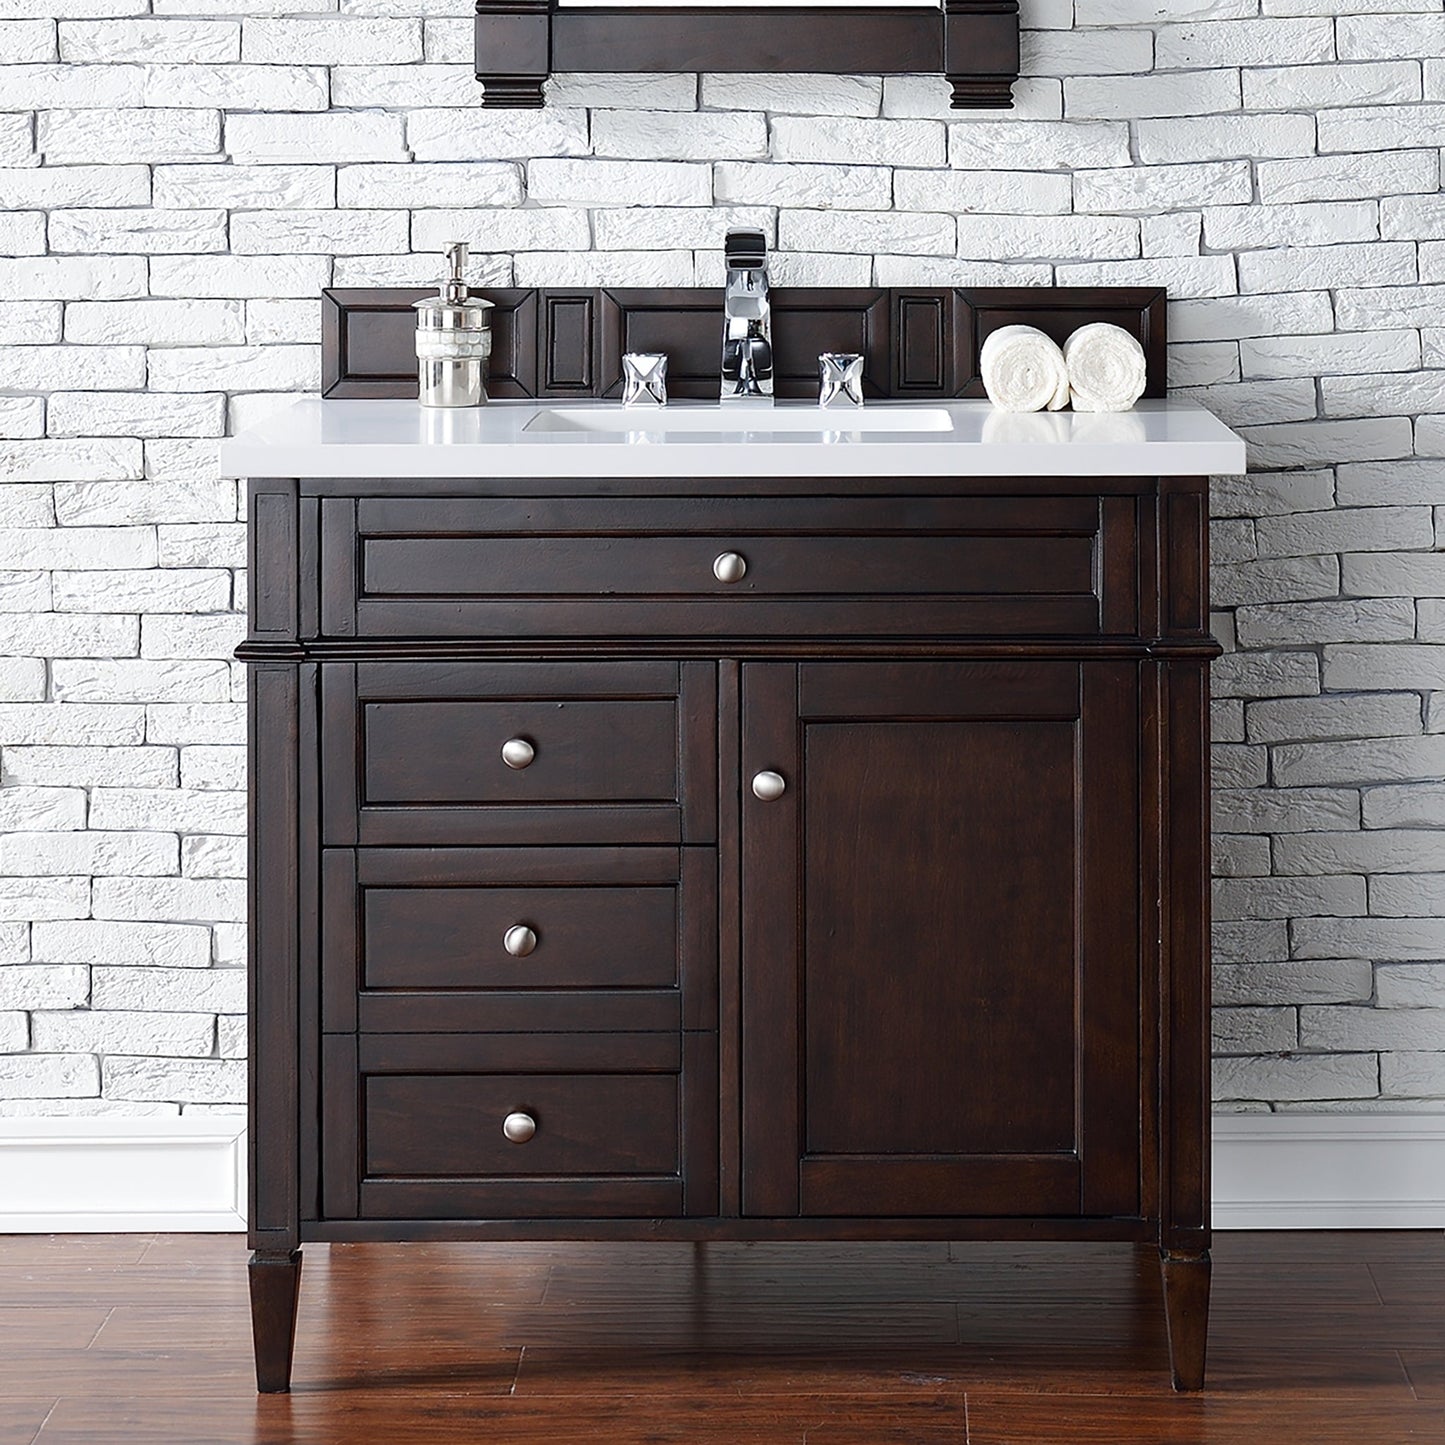 Brittany 36" Single Bathroom Vanity in Burnished Mahogany Single Bathroom Vanity James Martin Vanities Select Your Top 